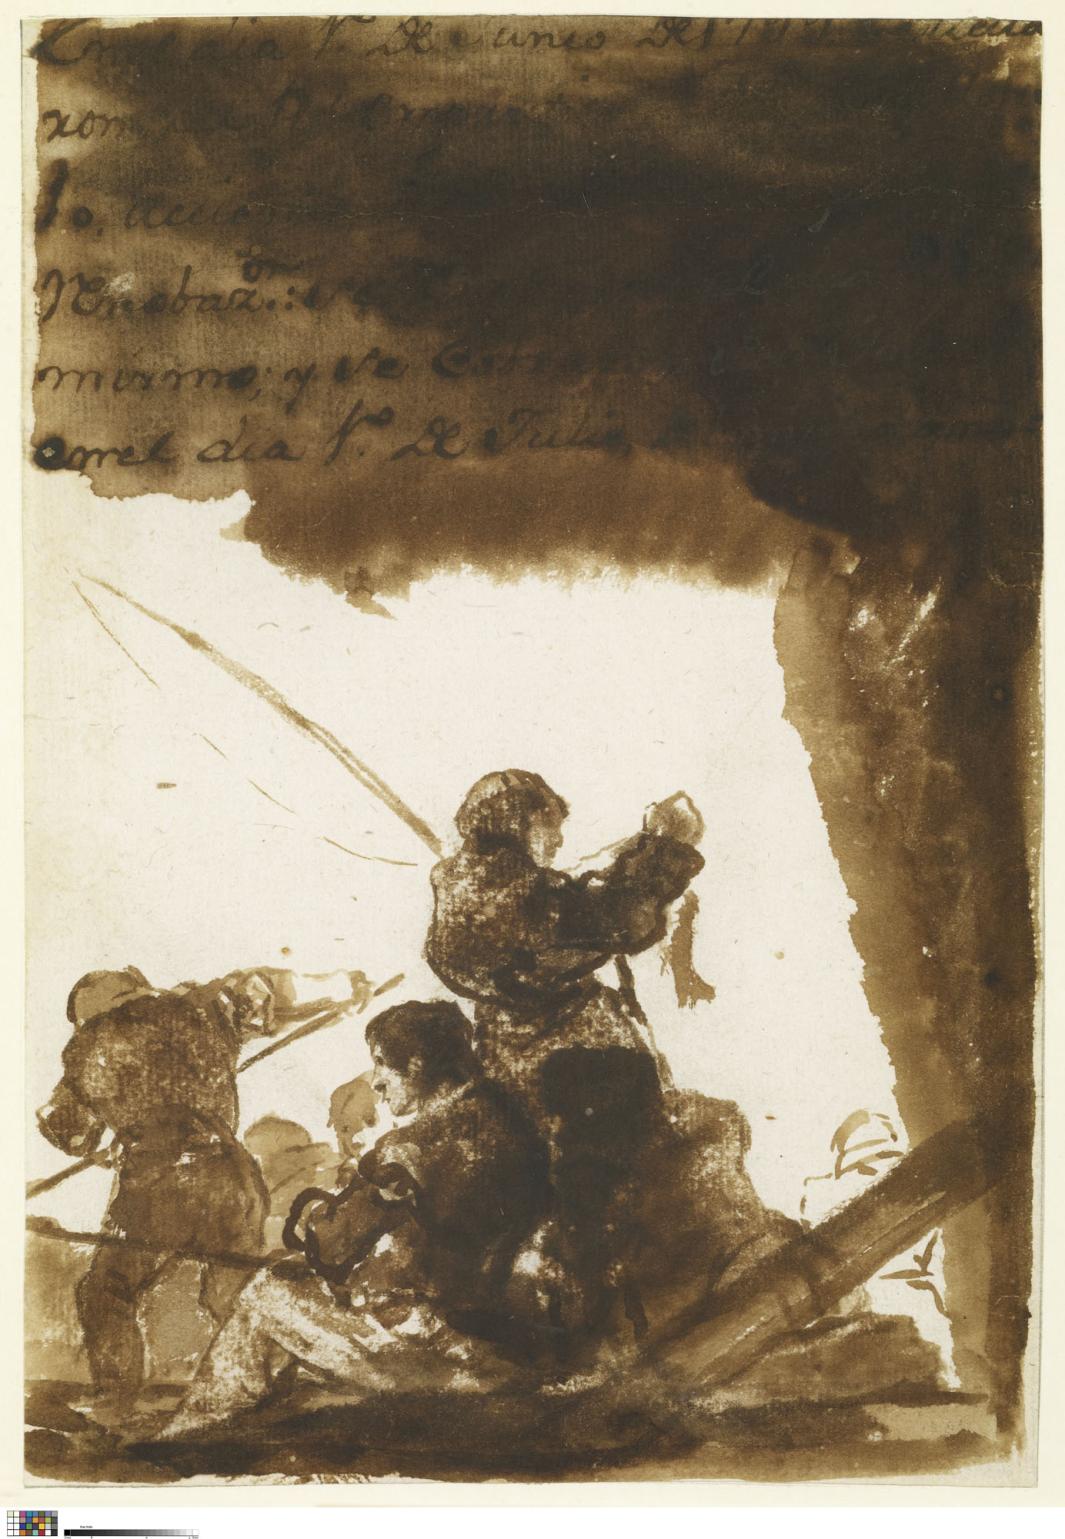 ink sketch of fishermen on a boat holding poles and caught fish